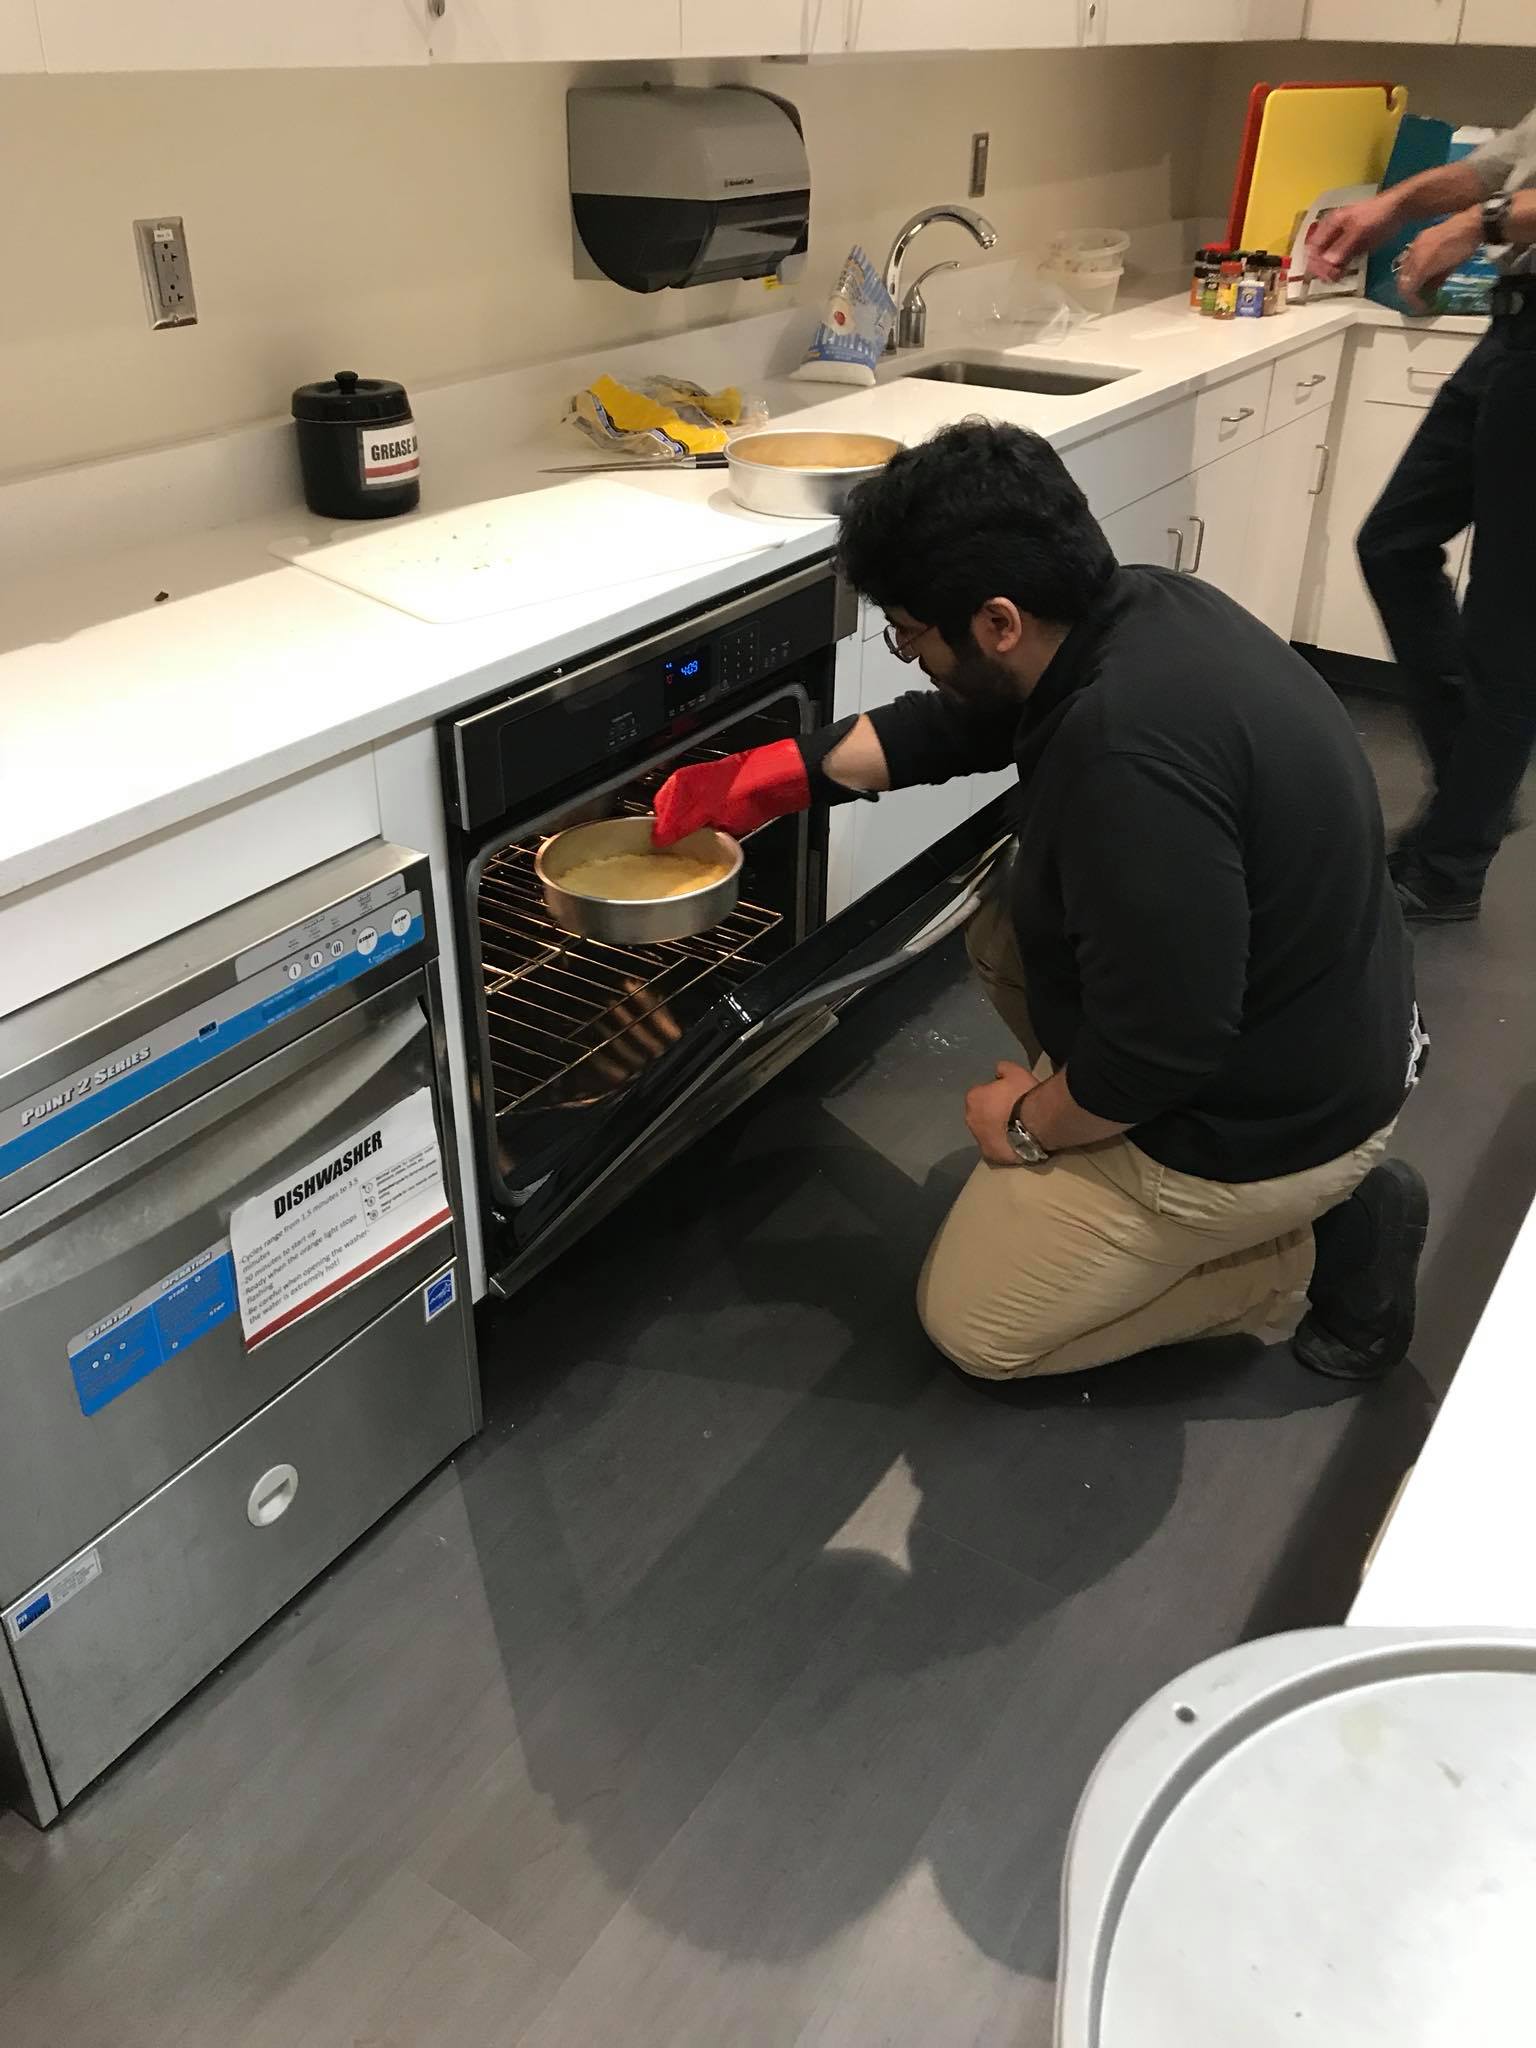 Student pulling baked item out of an oven